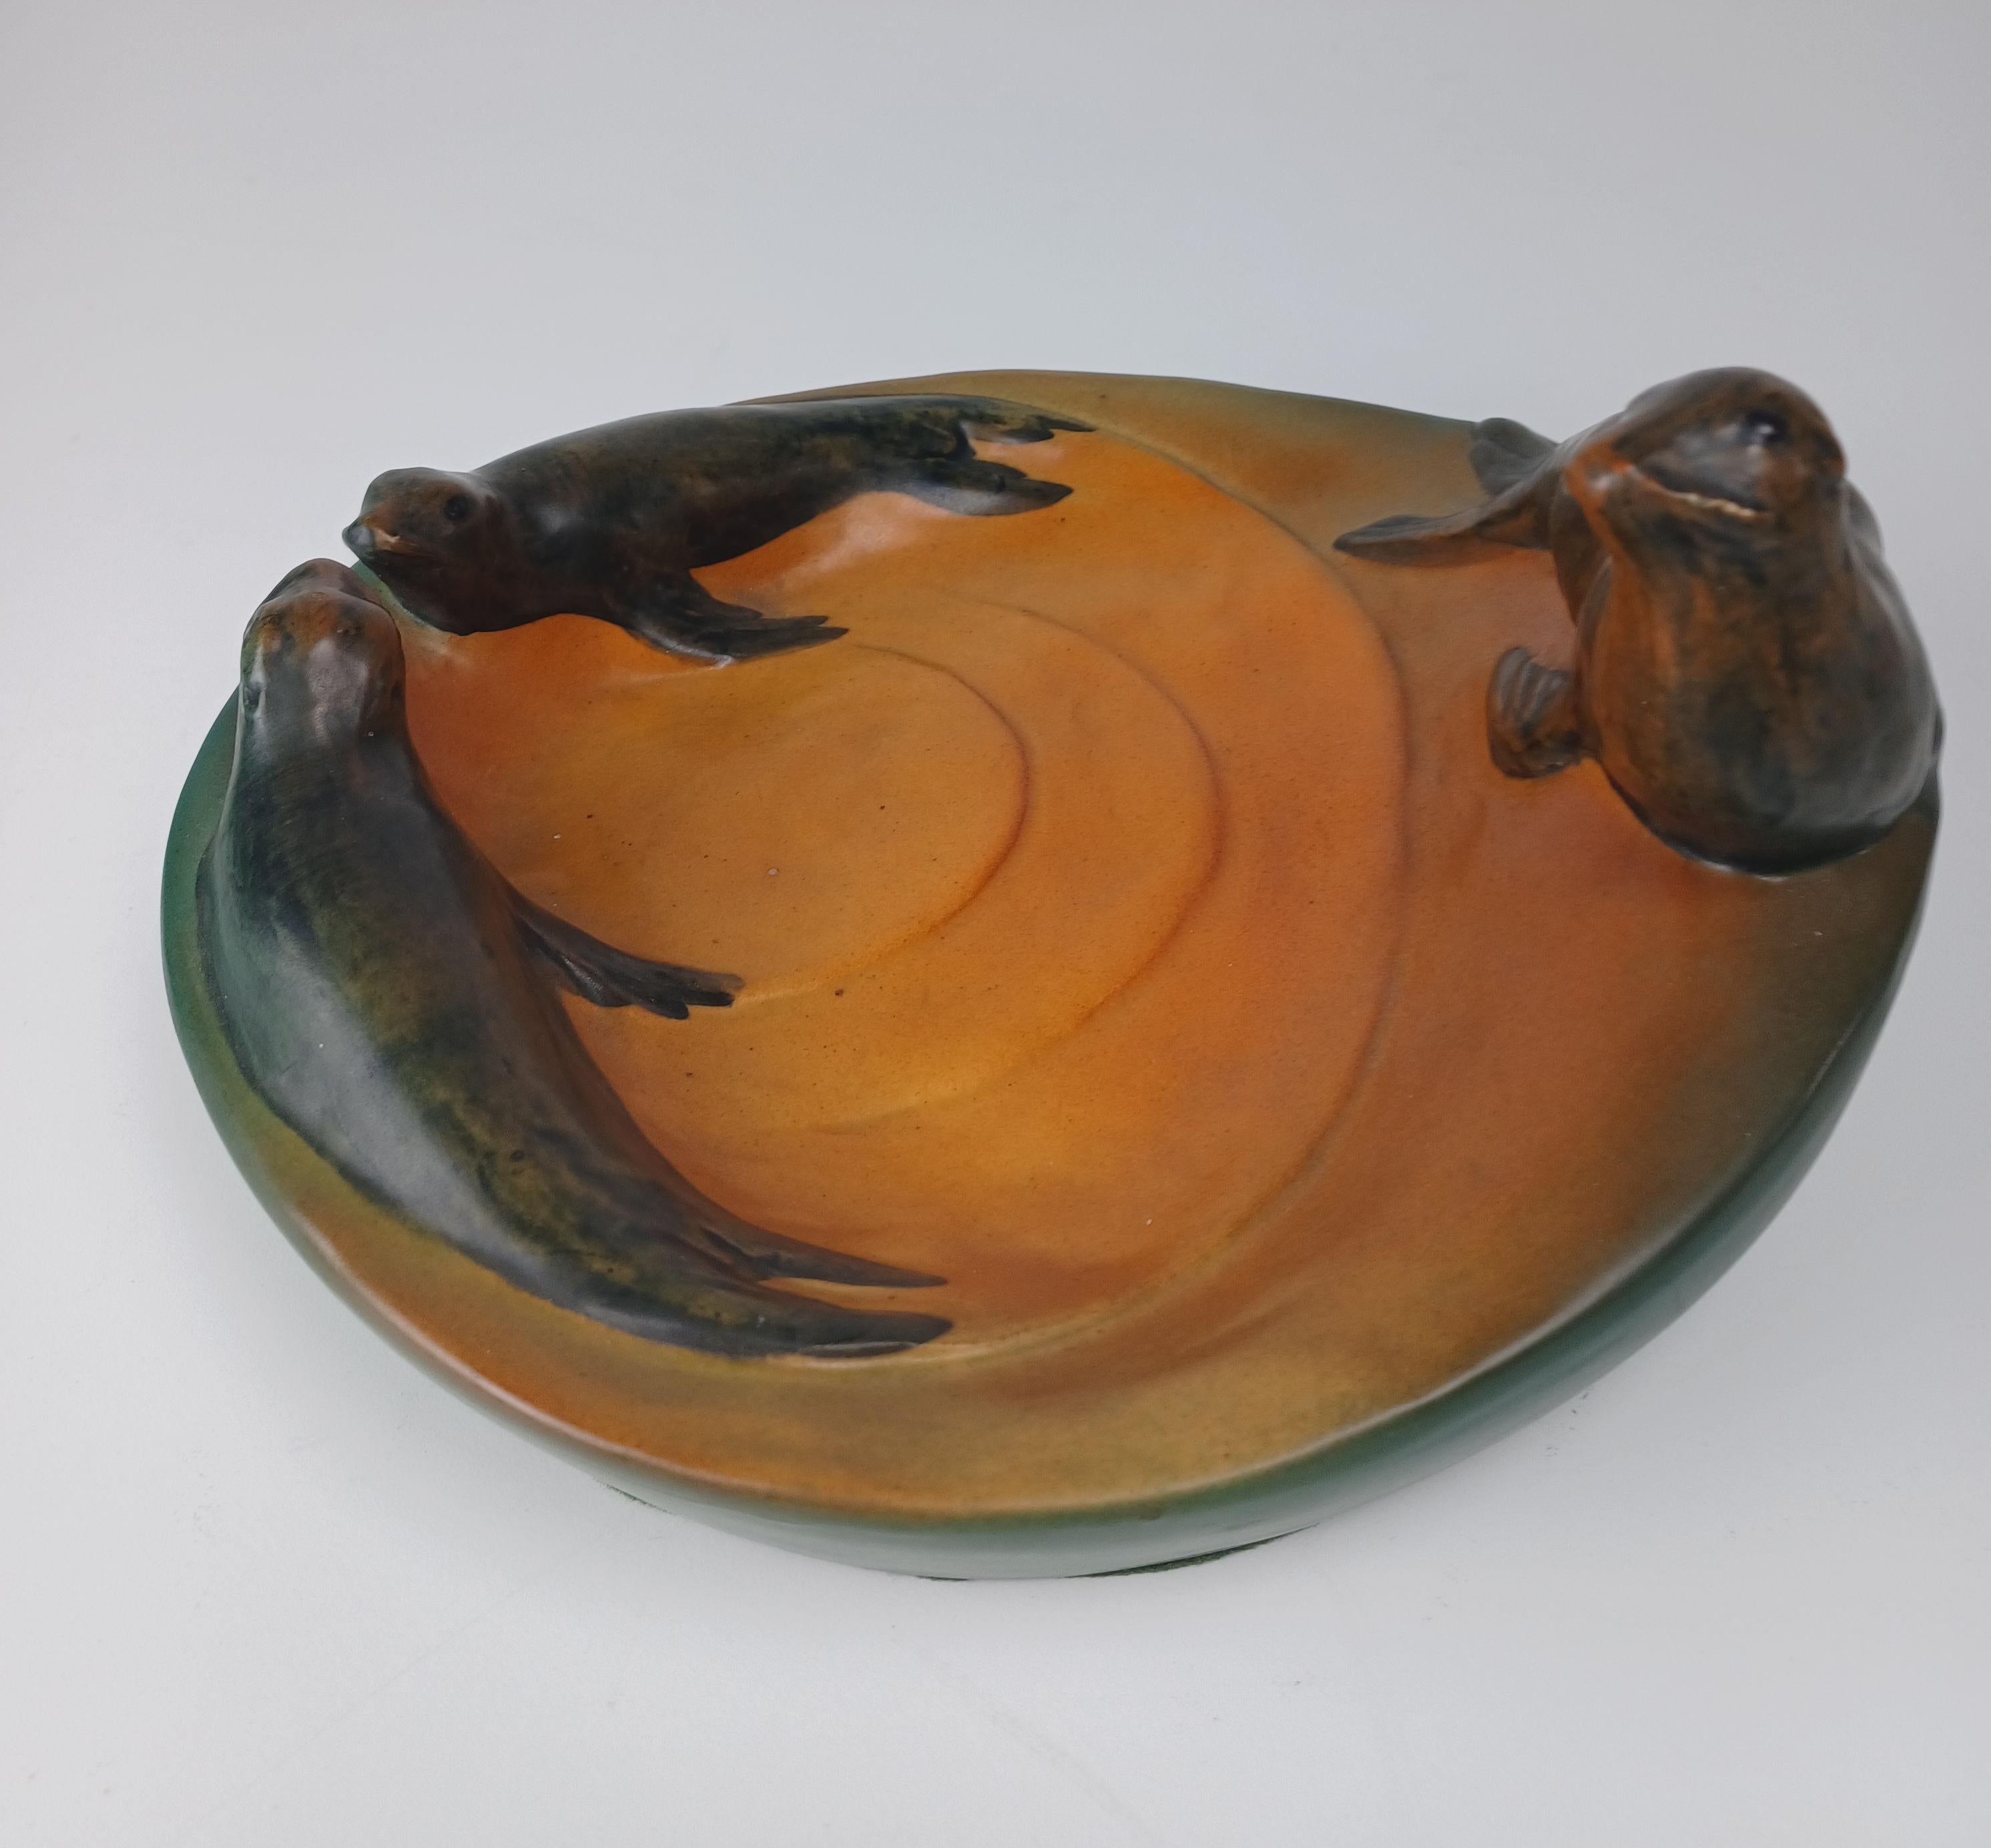 1910's Danish Art Nouveau Handcrafted Sealion Bowl - Ash Tray by P. Ipsens Enke In Good Condition In Knebel, DK